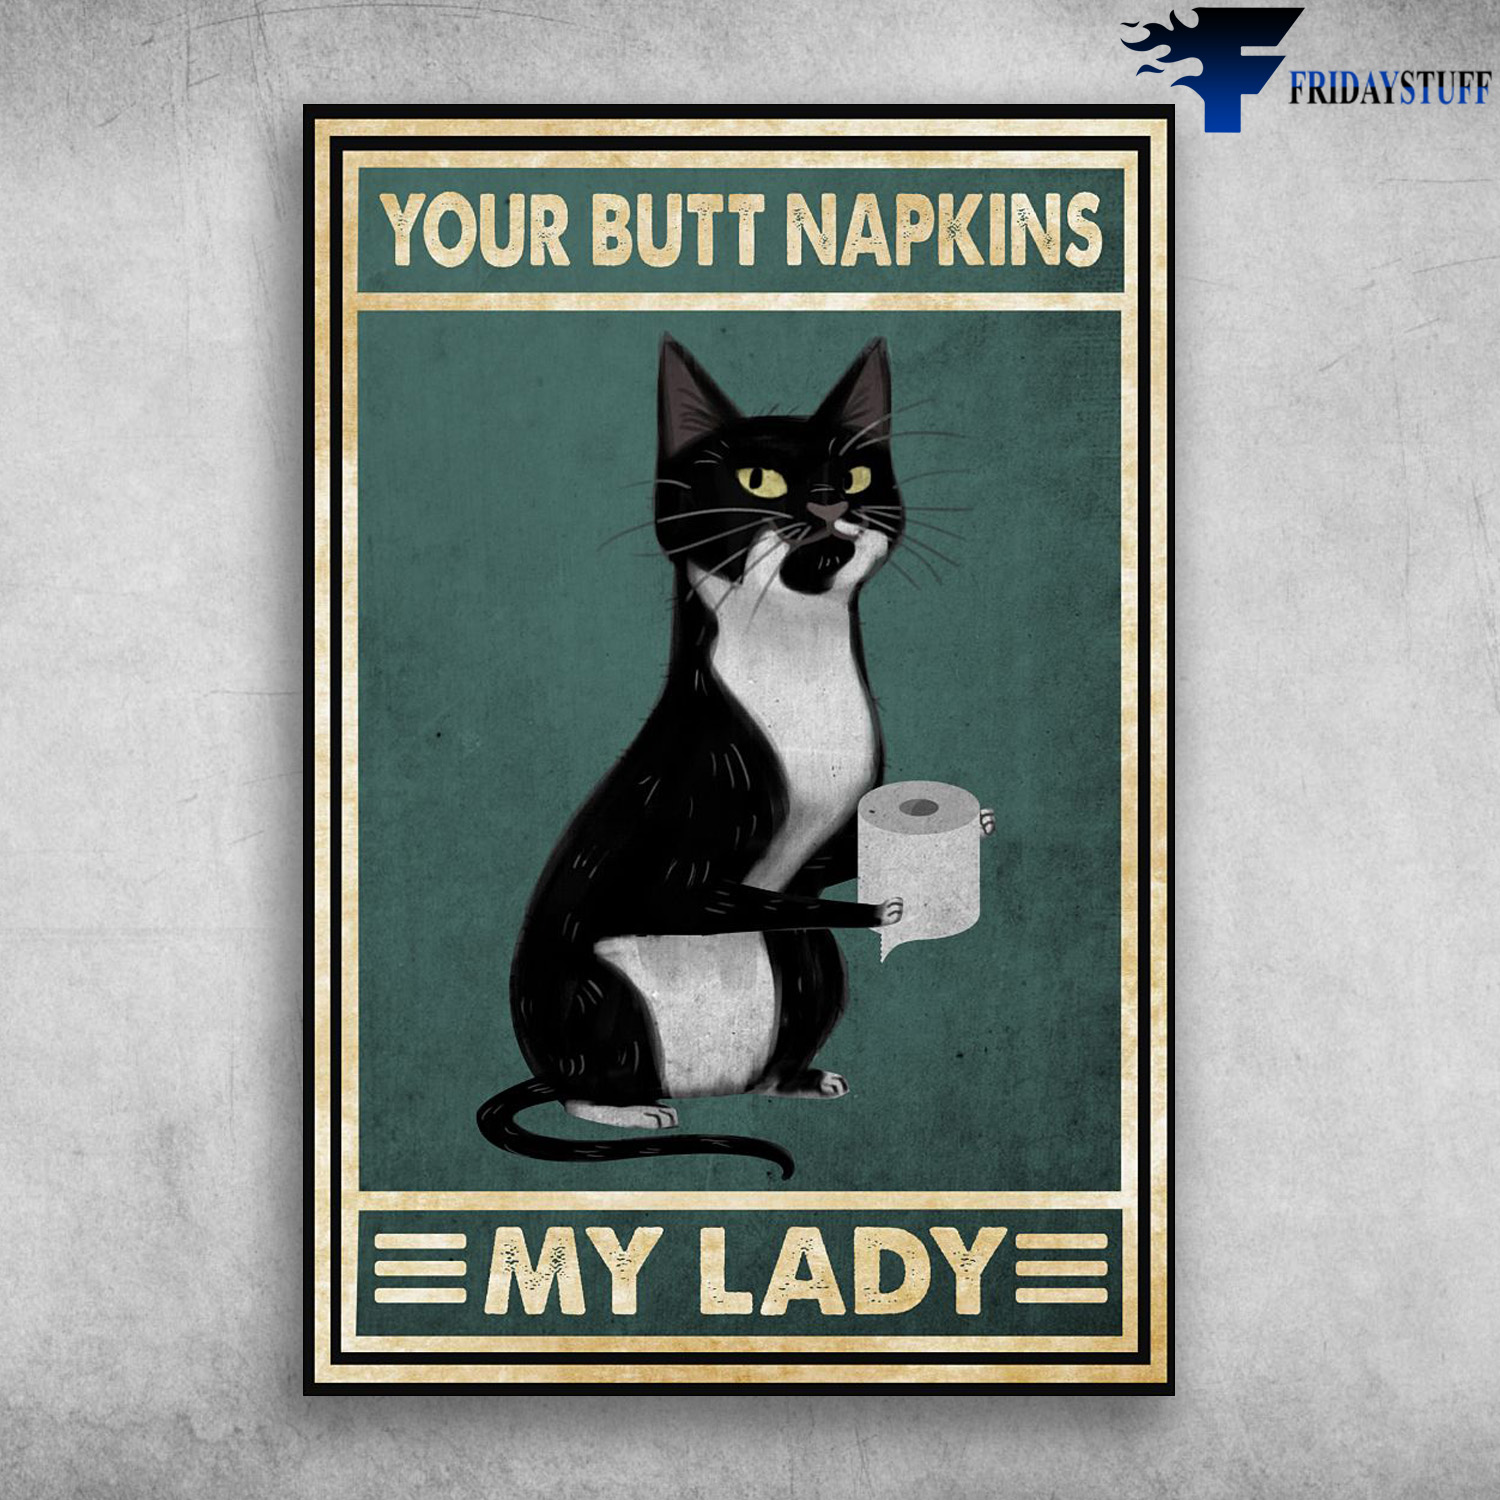 Black Cat And Toilet Paper Roll - Your Butt Napkins, My Lady